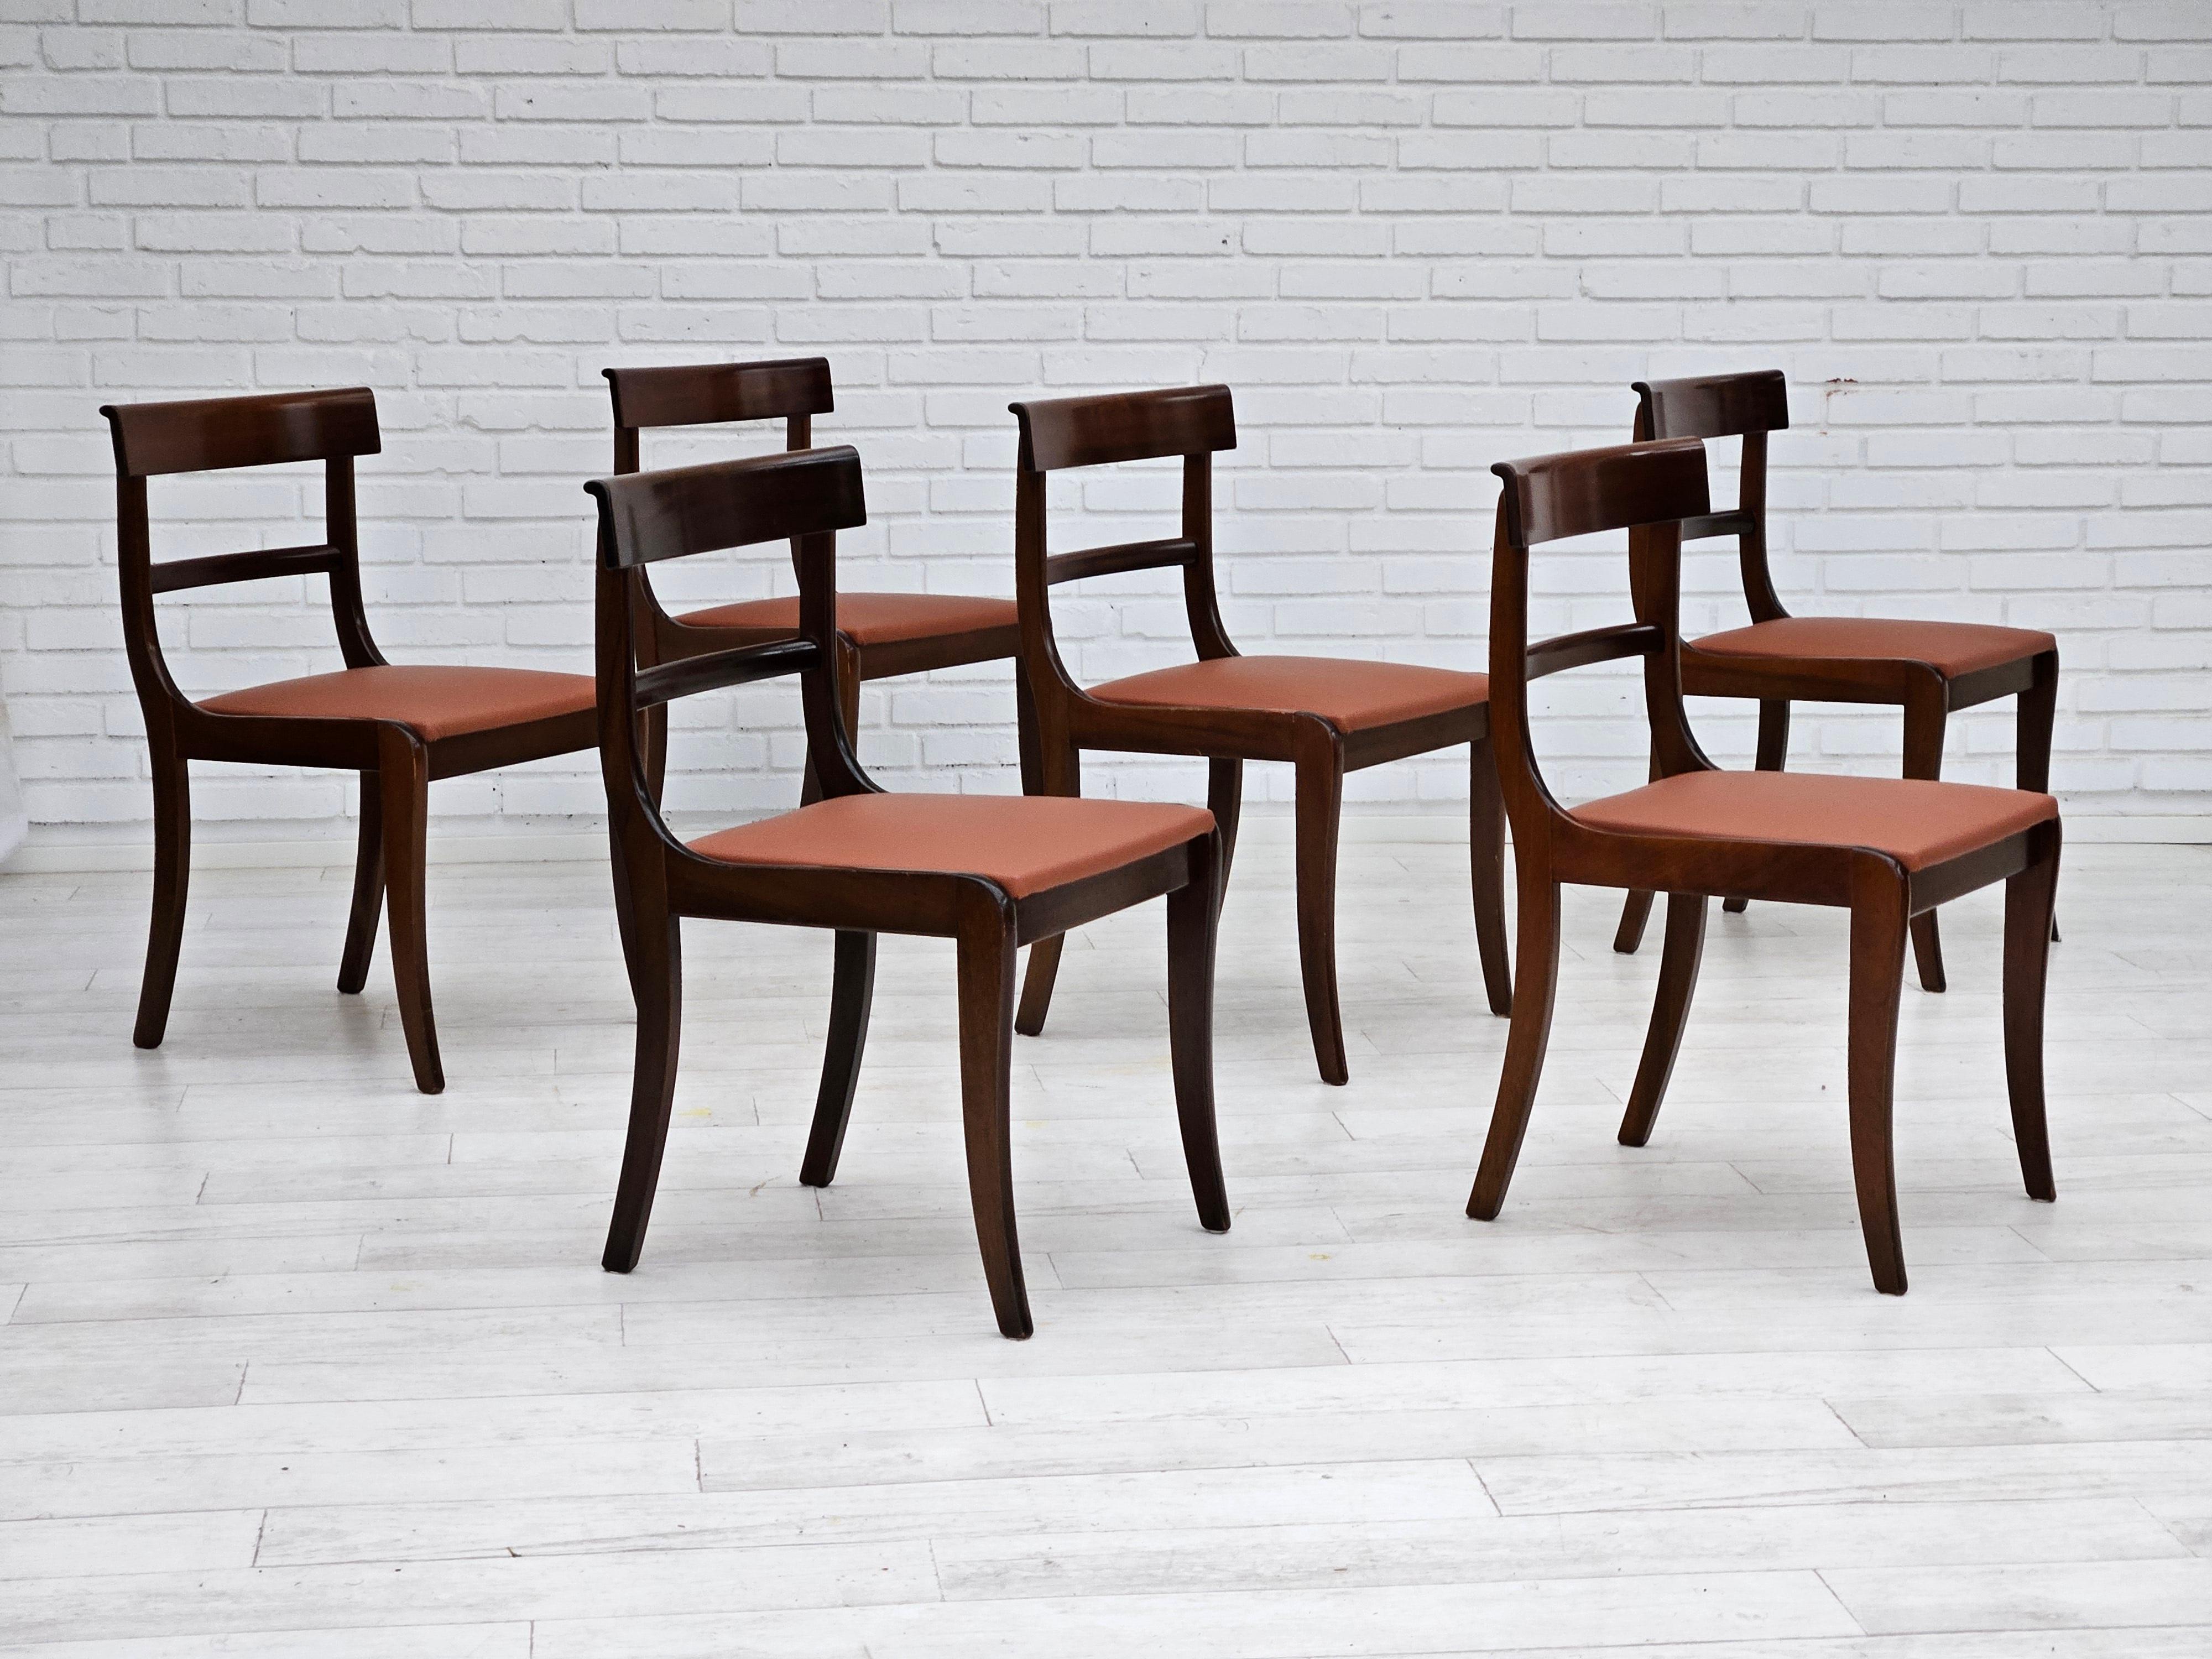 Scandinavian Modern 1970s, reupholstered set of 6 pcs Danish dining chairs, teak wood, leather. For Sale